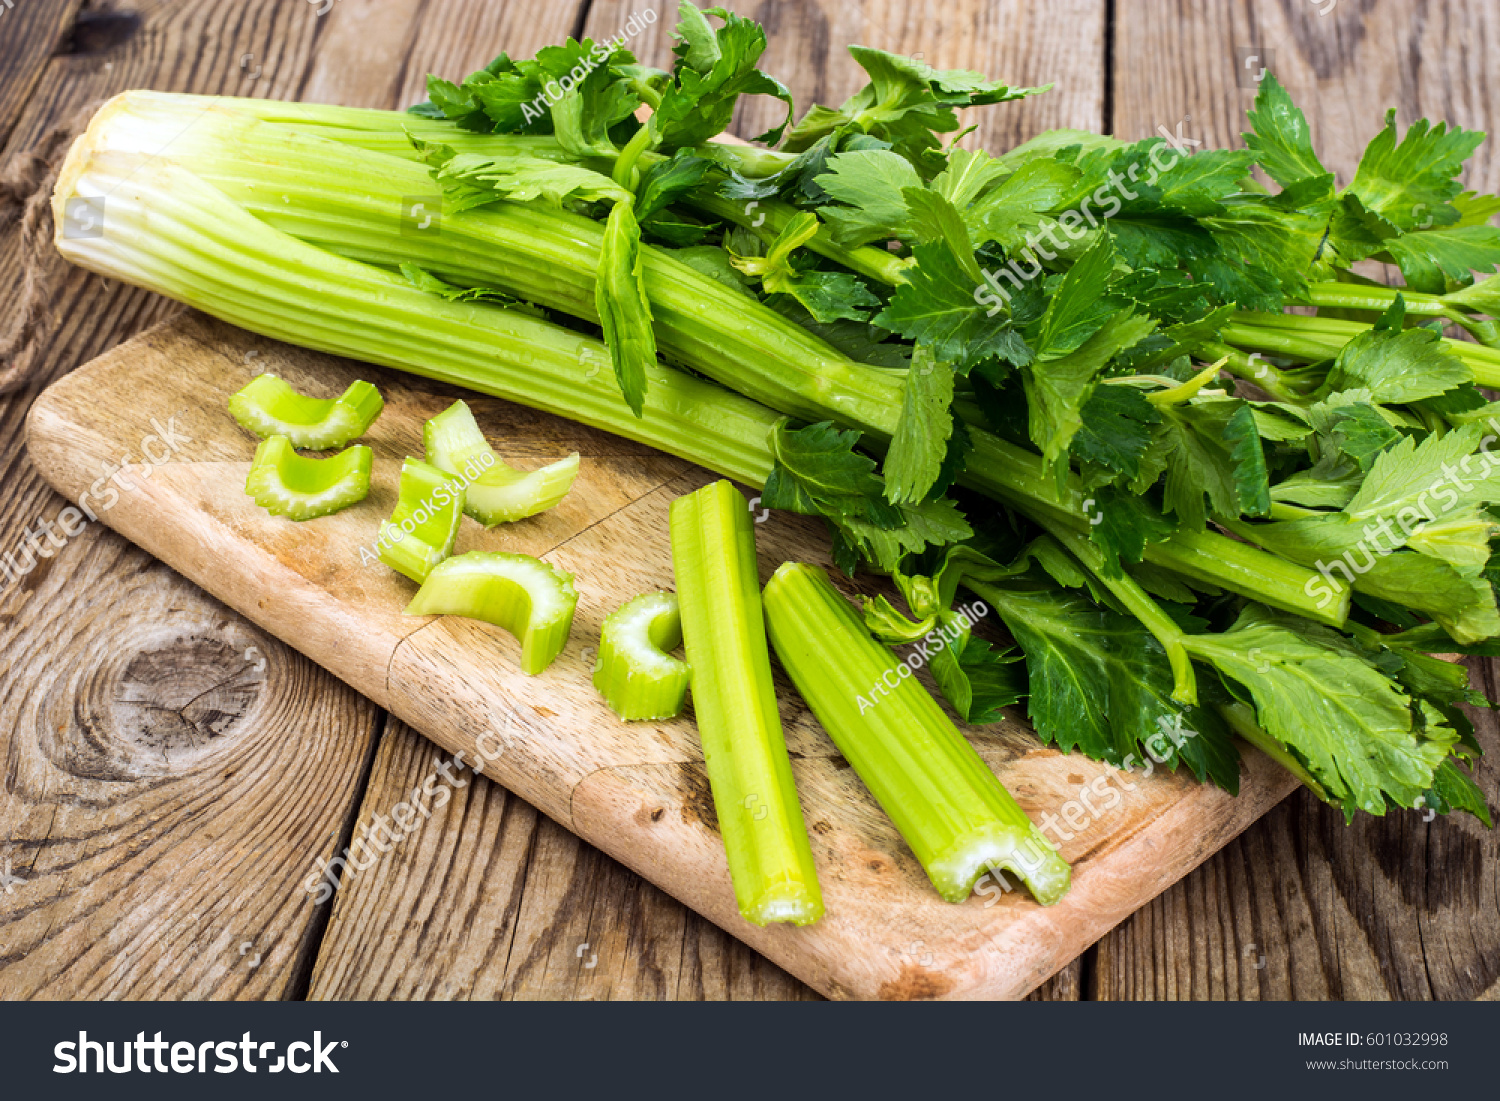 Bunch of fresh celery stalk with leaves. Studio Photo #601032998